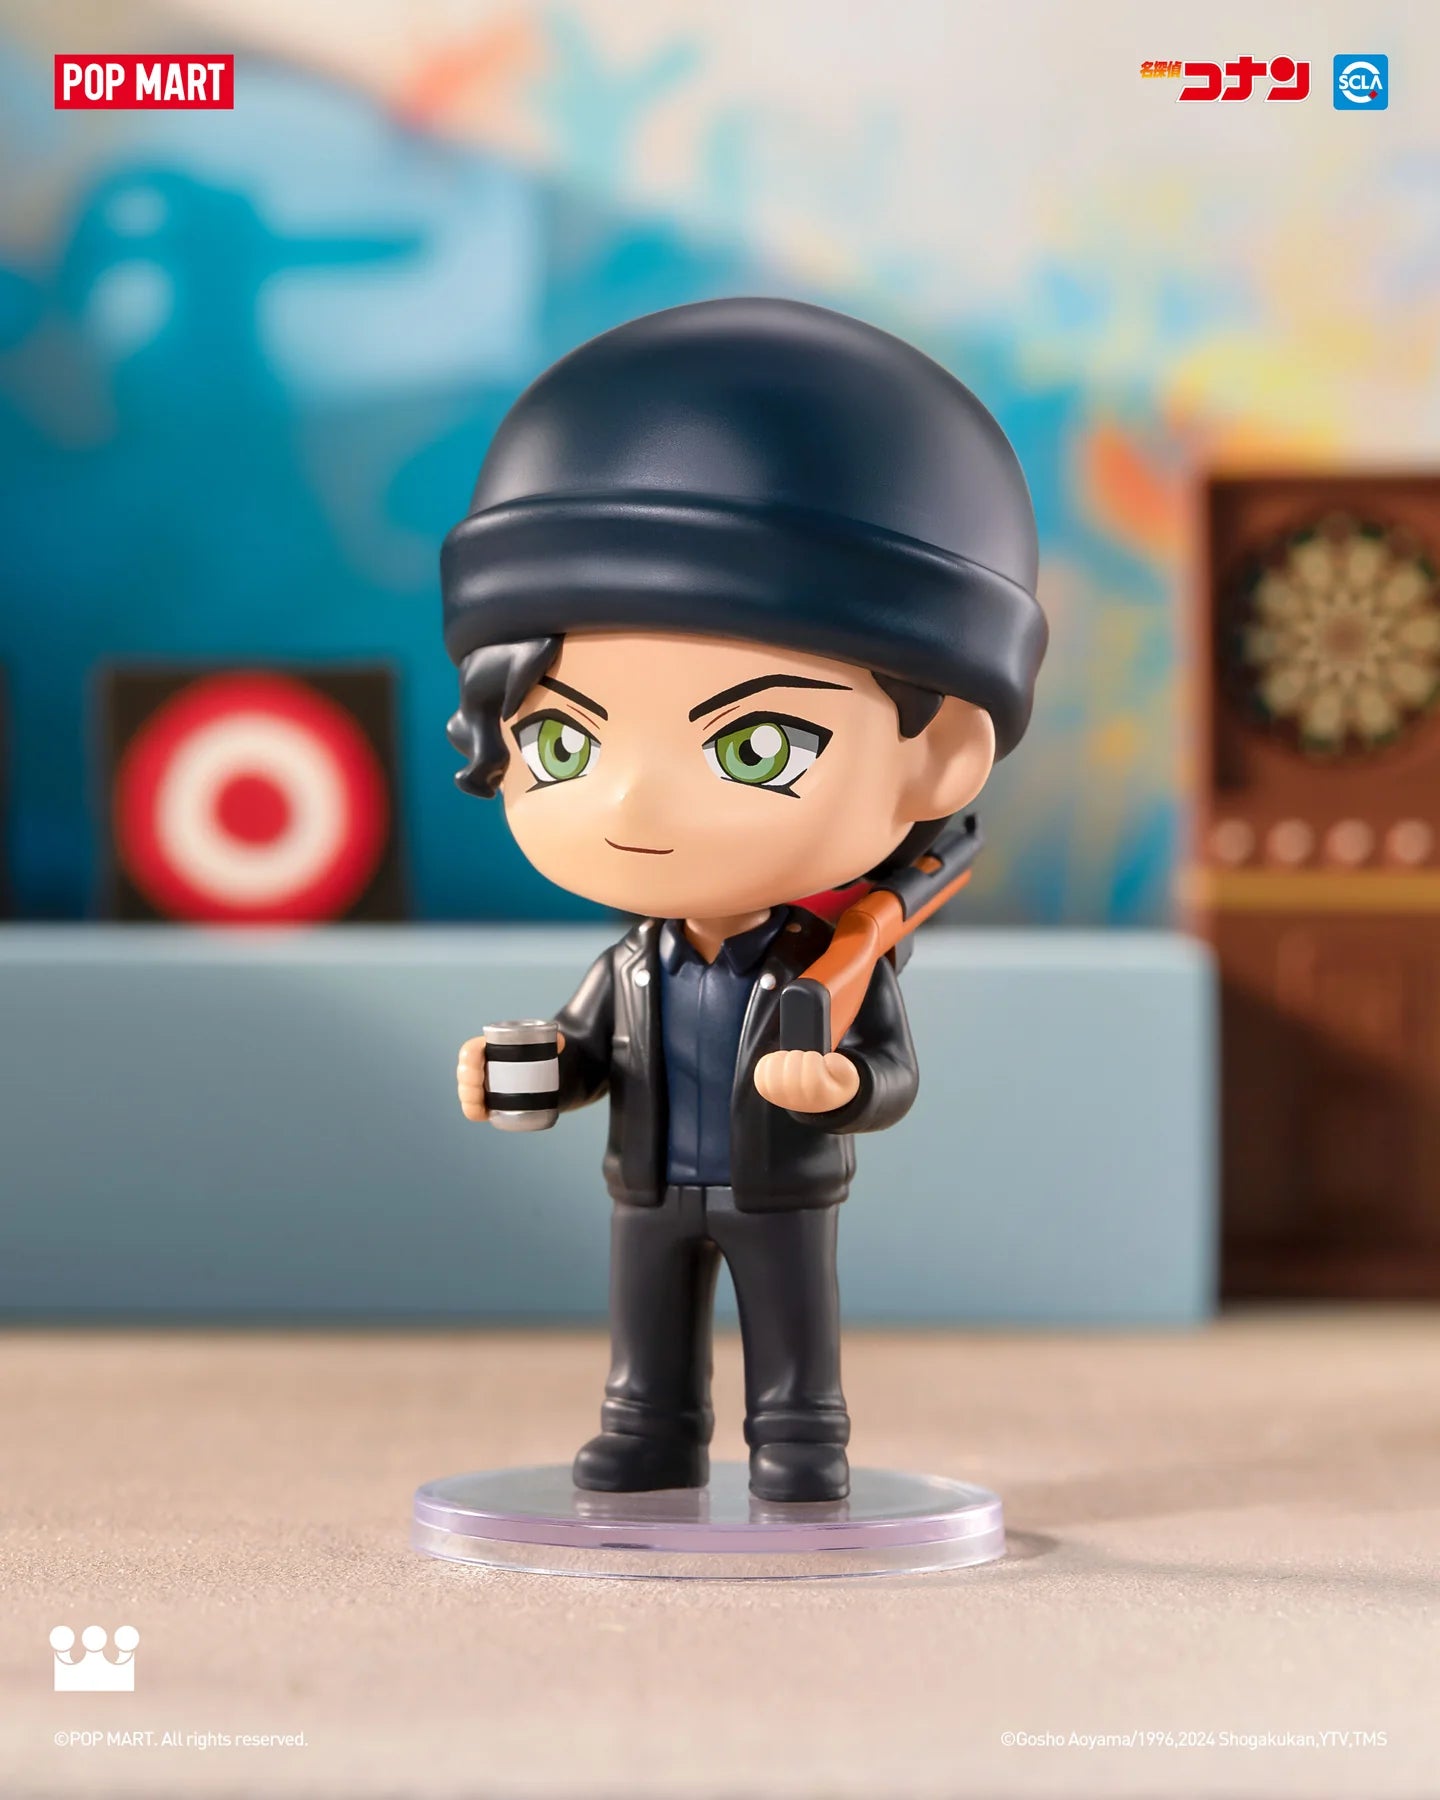 Detective Conan Carnival Blind Box Series: Toy figurine of a man holding a gun, part of a mystery-themed blind box collection.